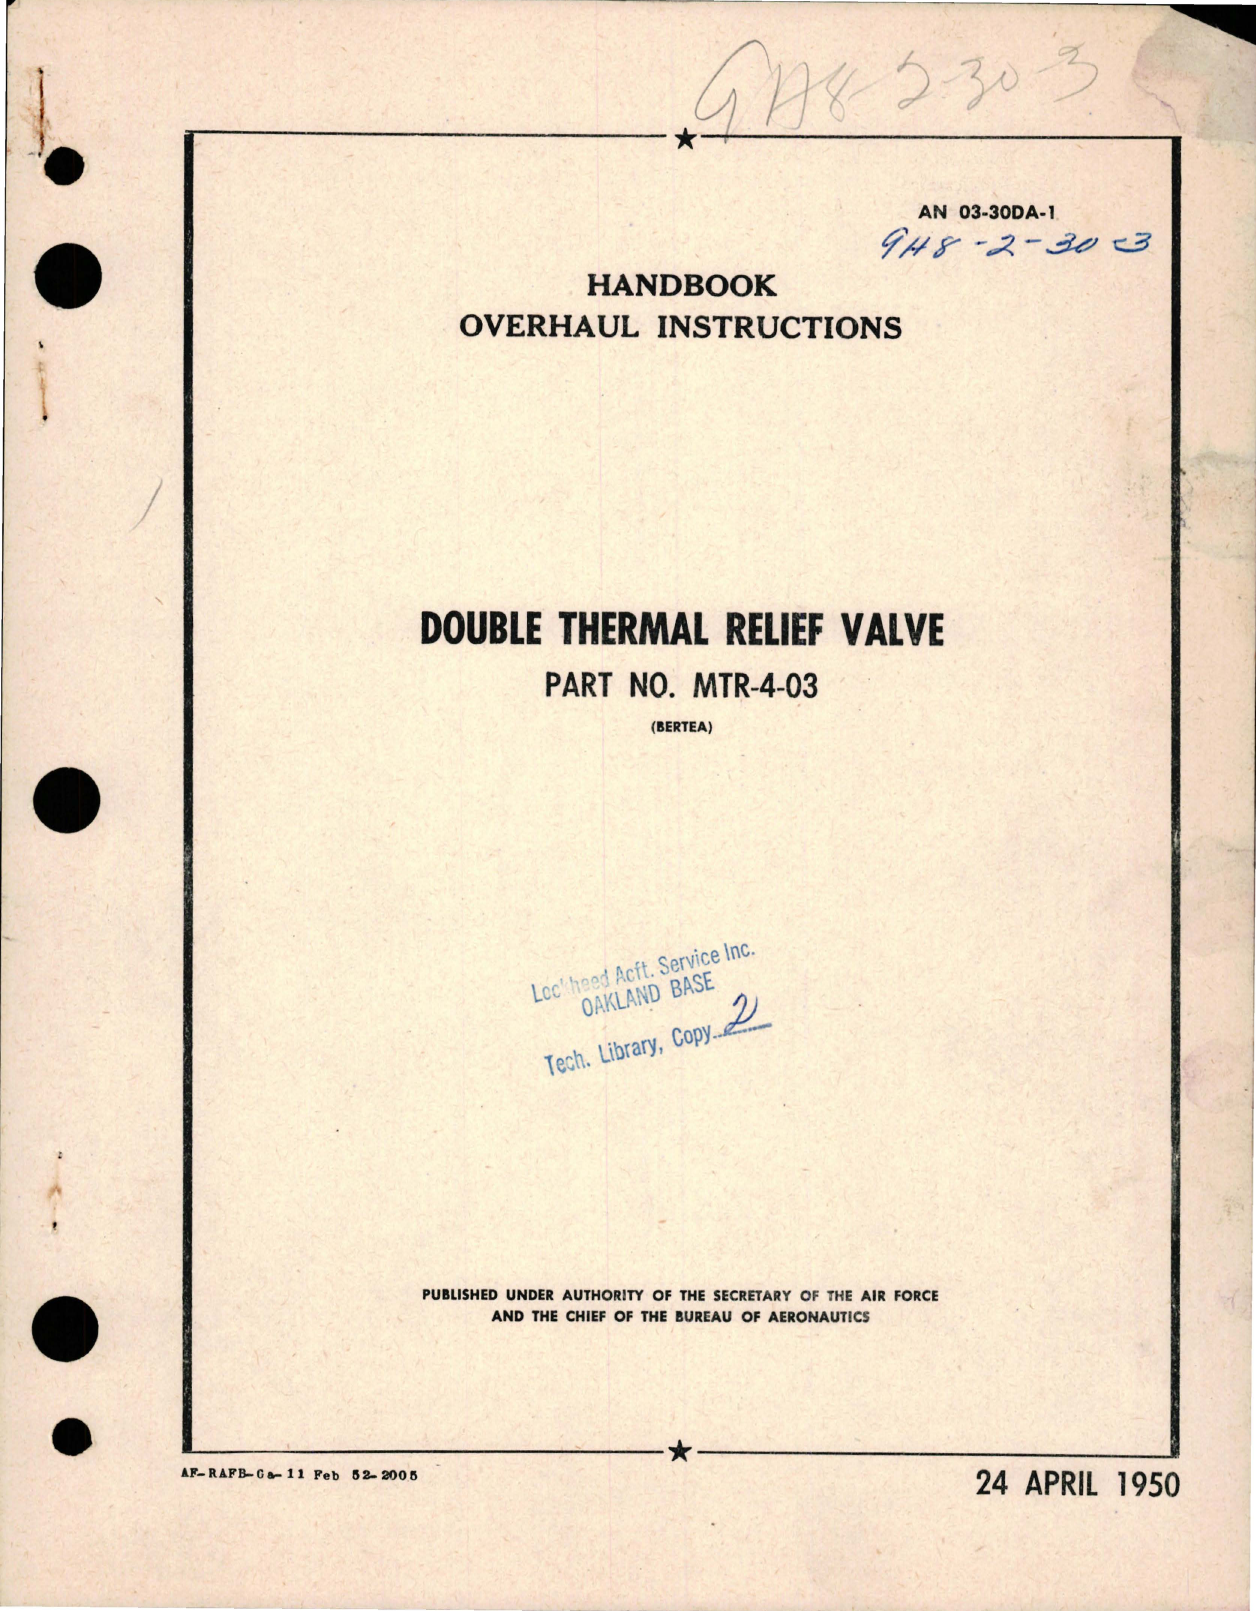 Sample page 1 from AirCorps Library document: Overhaul Instructions for Double Thermal Relief Valve - Part MTR-4-03